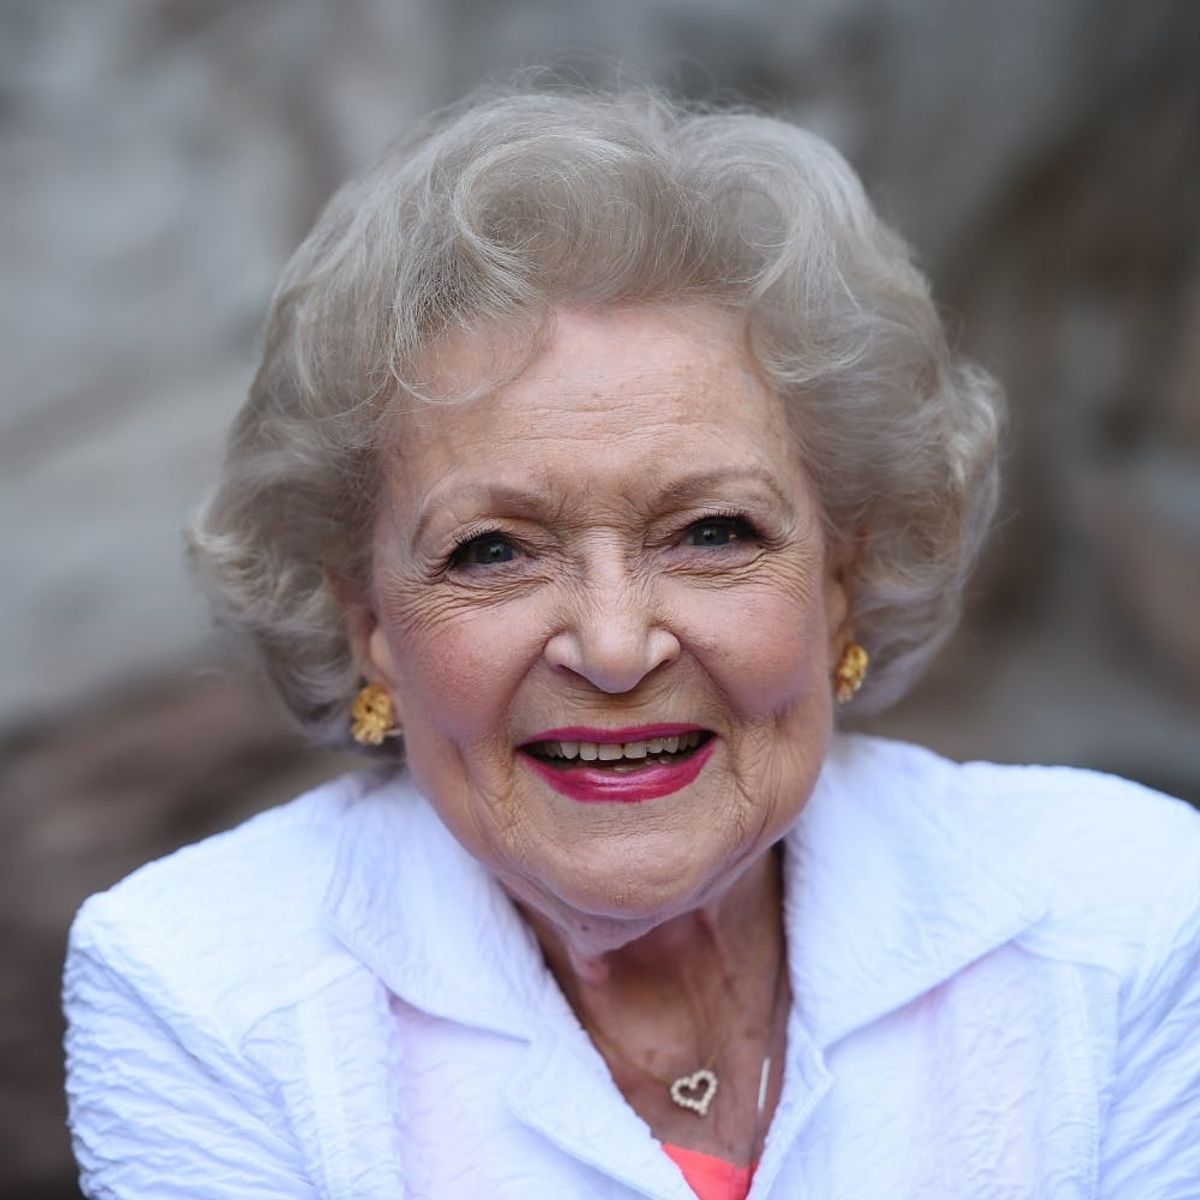 Celebs Are Beside Themselves Celebrating Betty White’s 95th Birthday